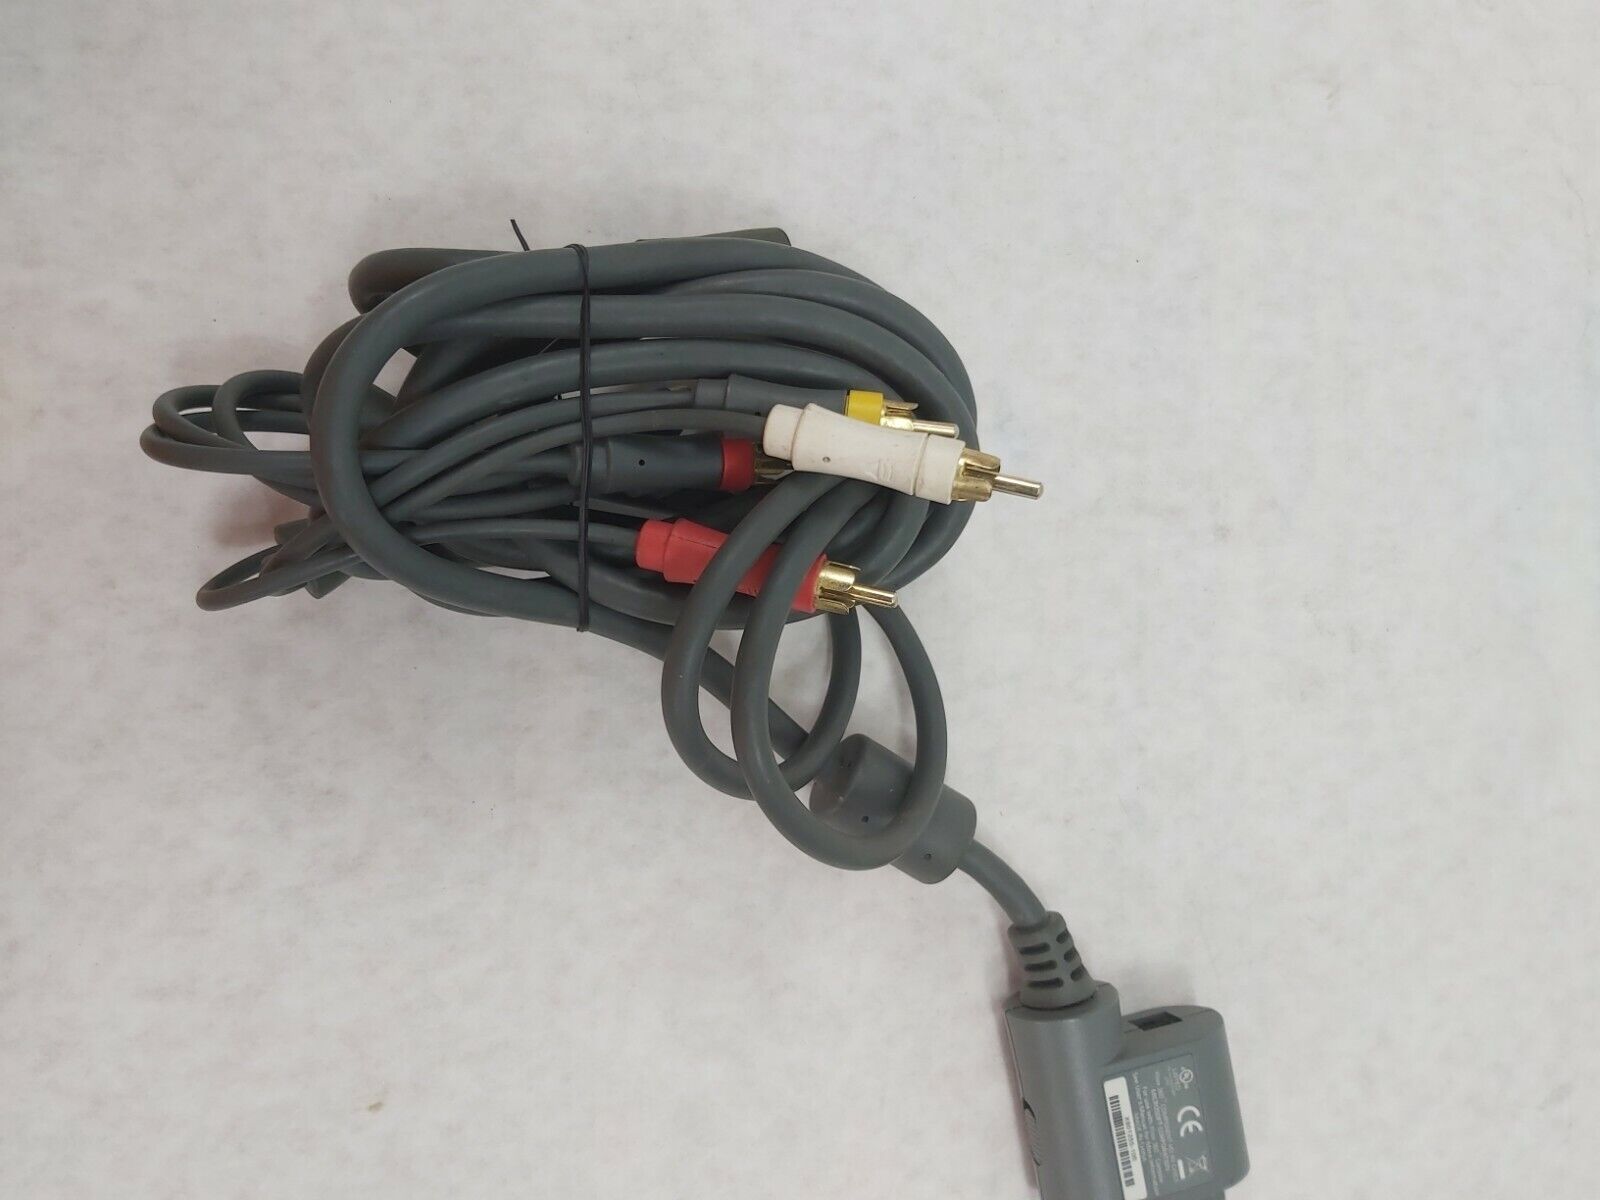 Genuine Microsoft Xbox 360 Component HD AV Cable - Used, for HD connection